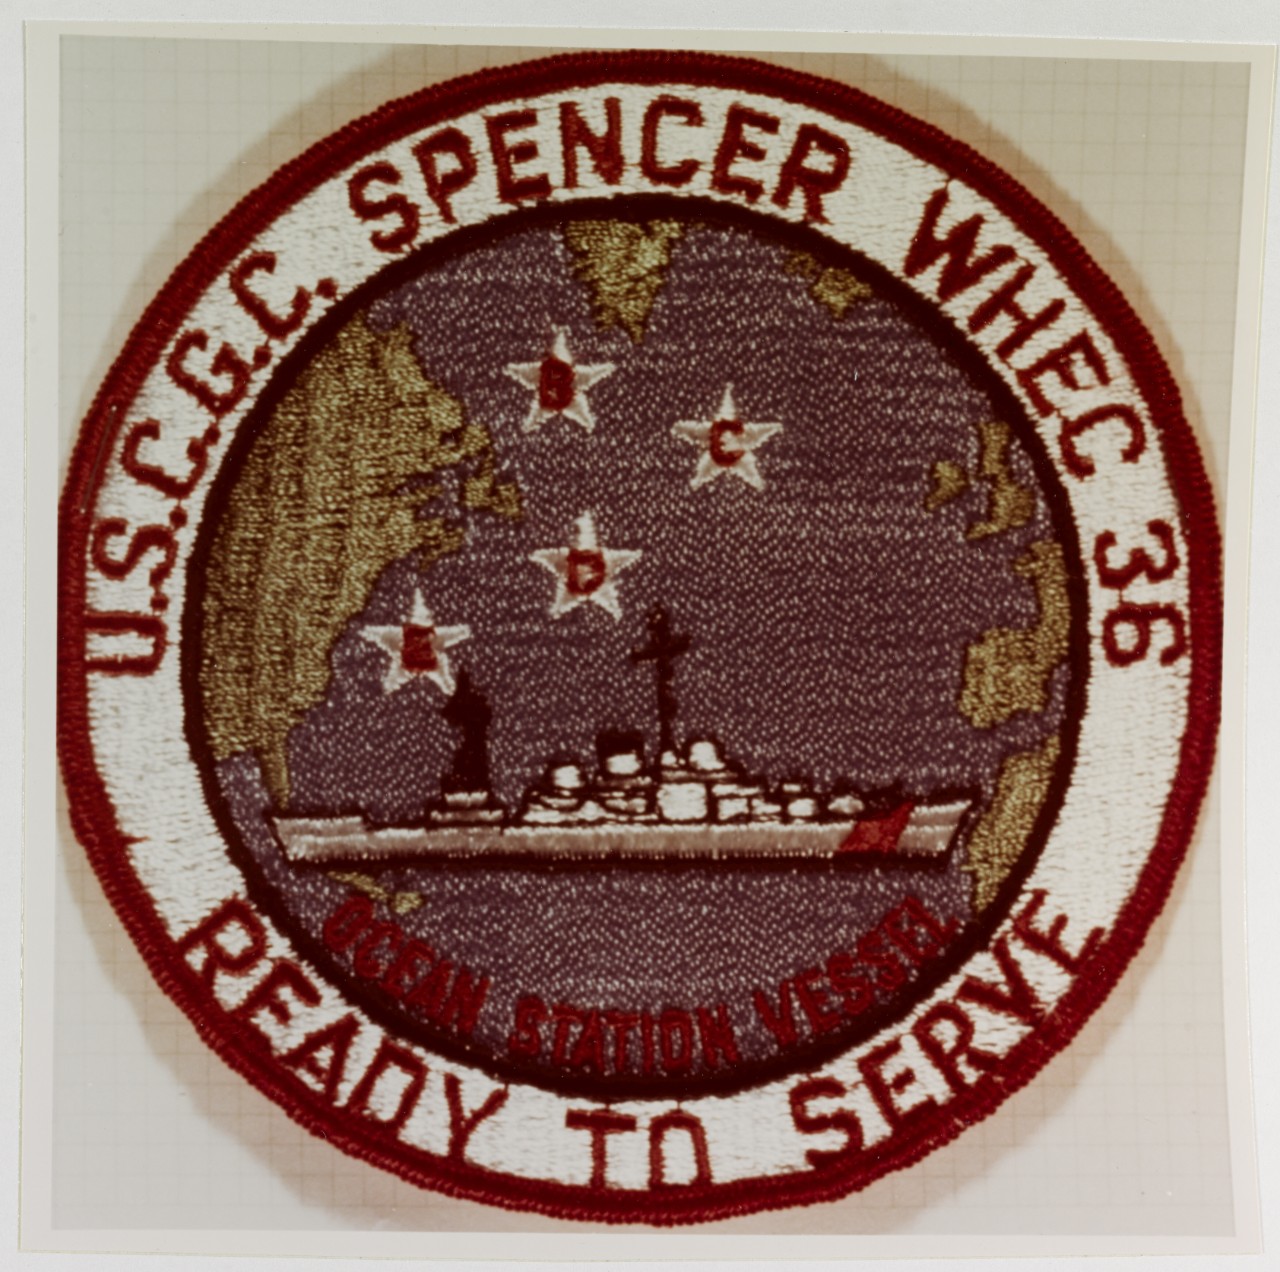 Uscgc Spencer (Wpg-36) Wallpapers